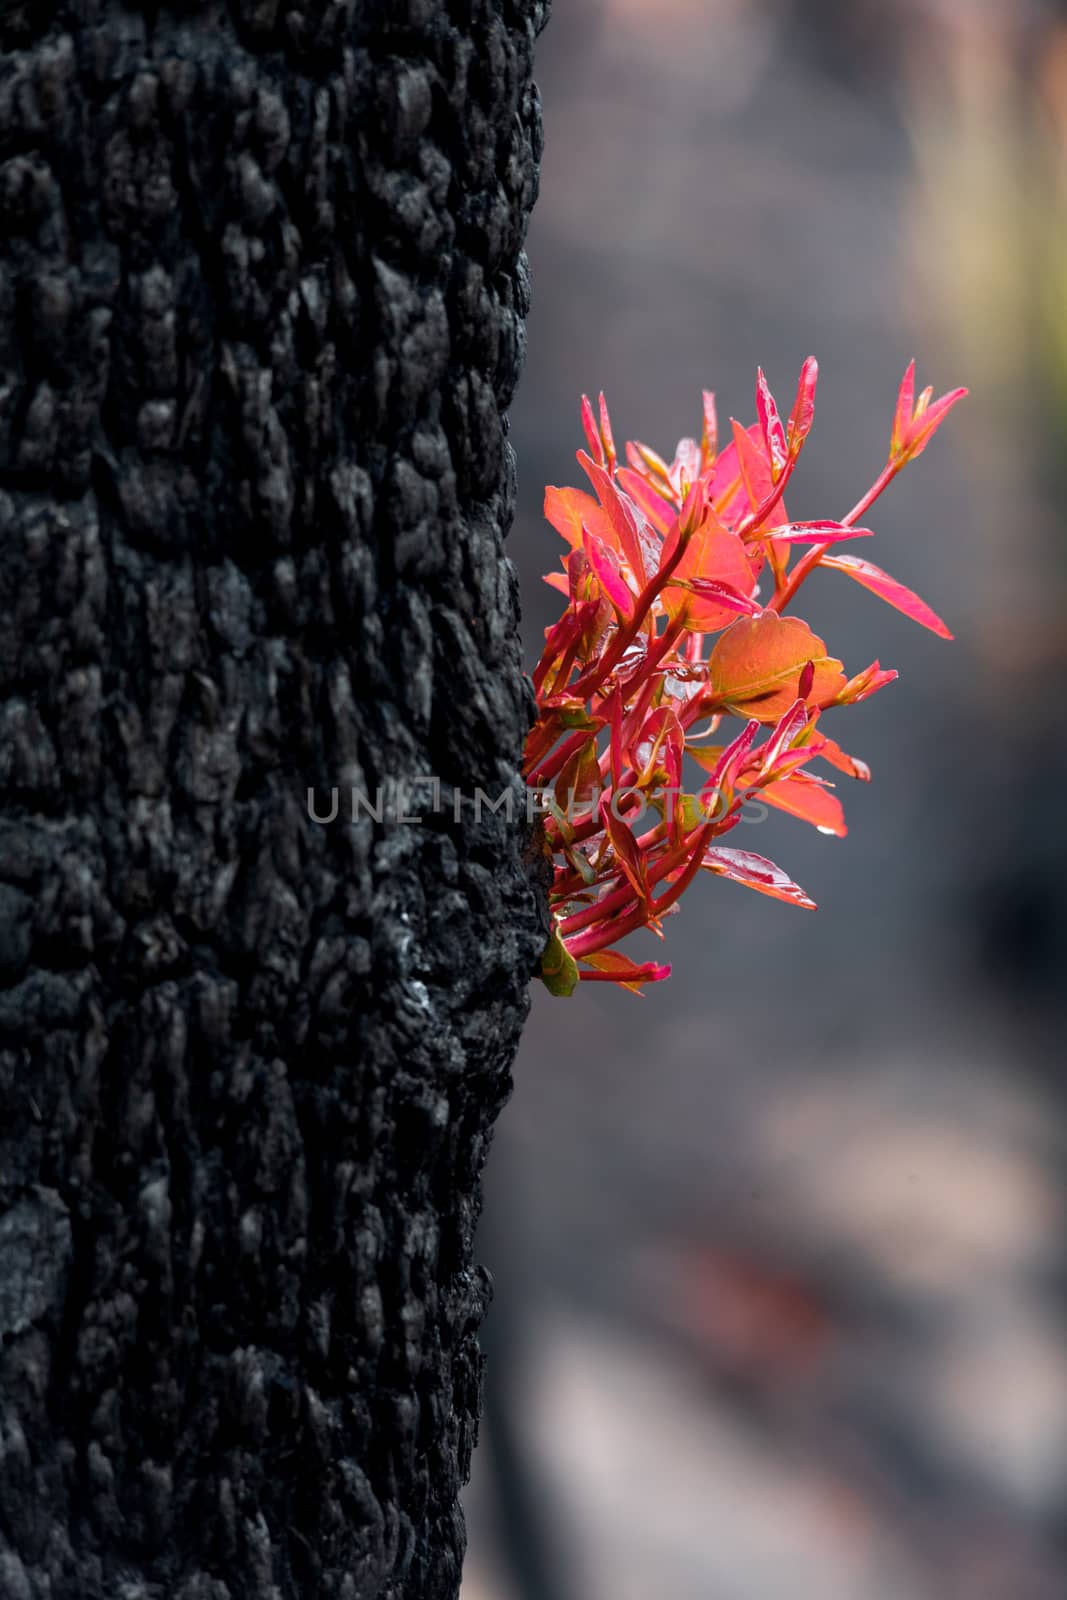 Australian trees burst forth with fresh new leaves and stems just days ofter bush fires sweep through